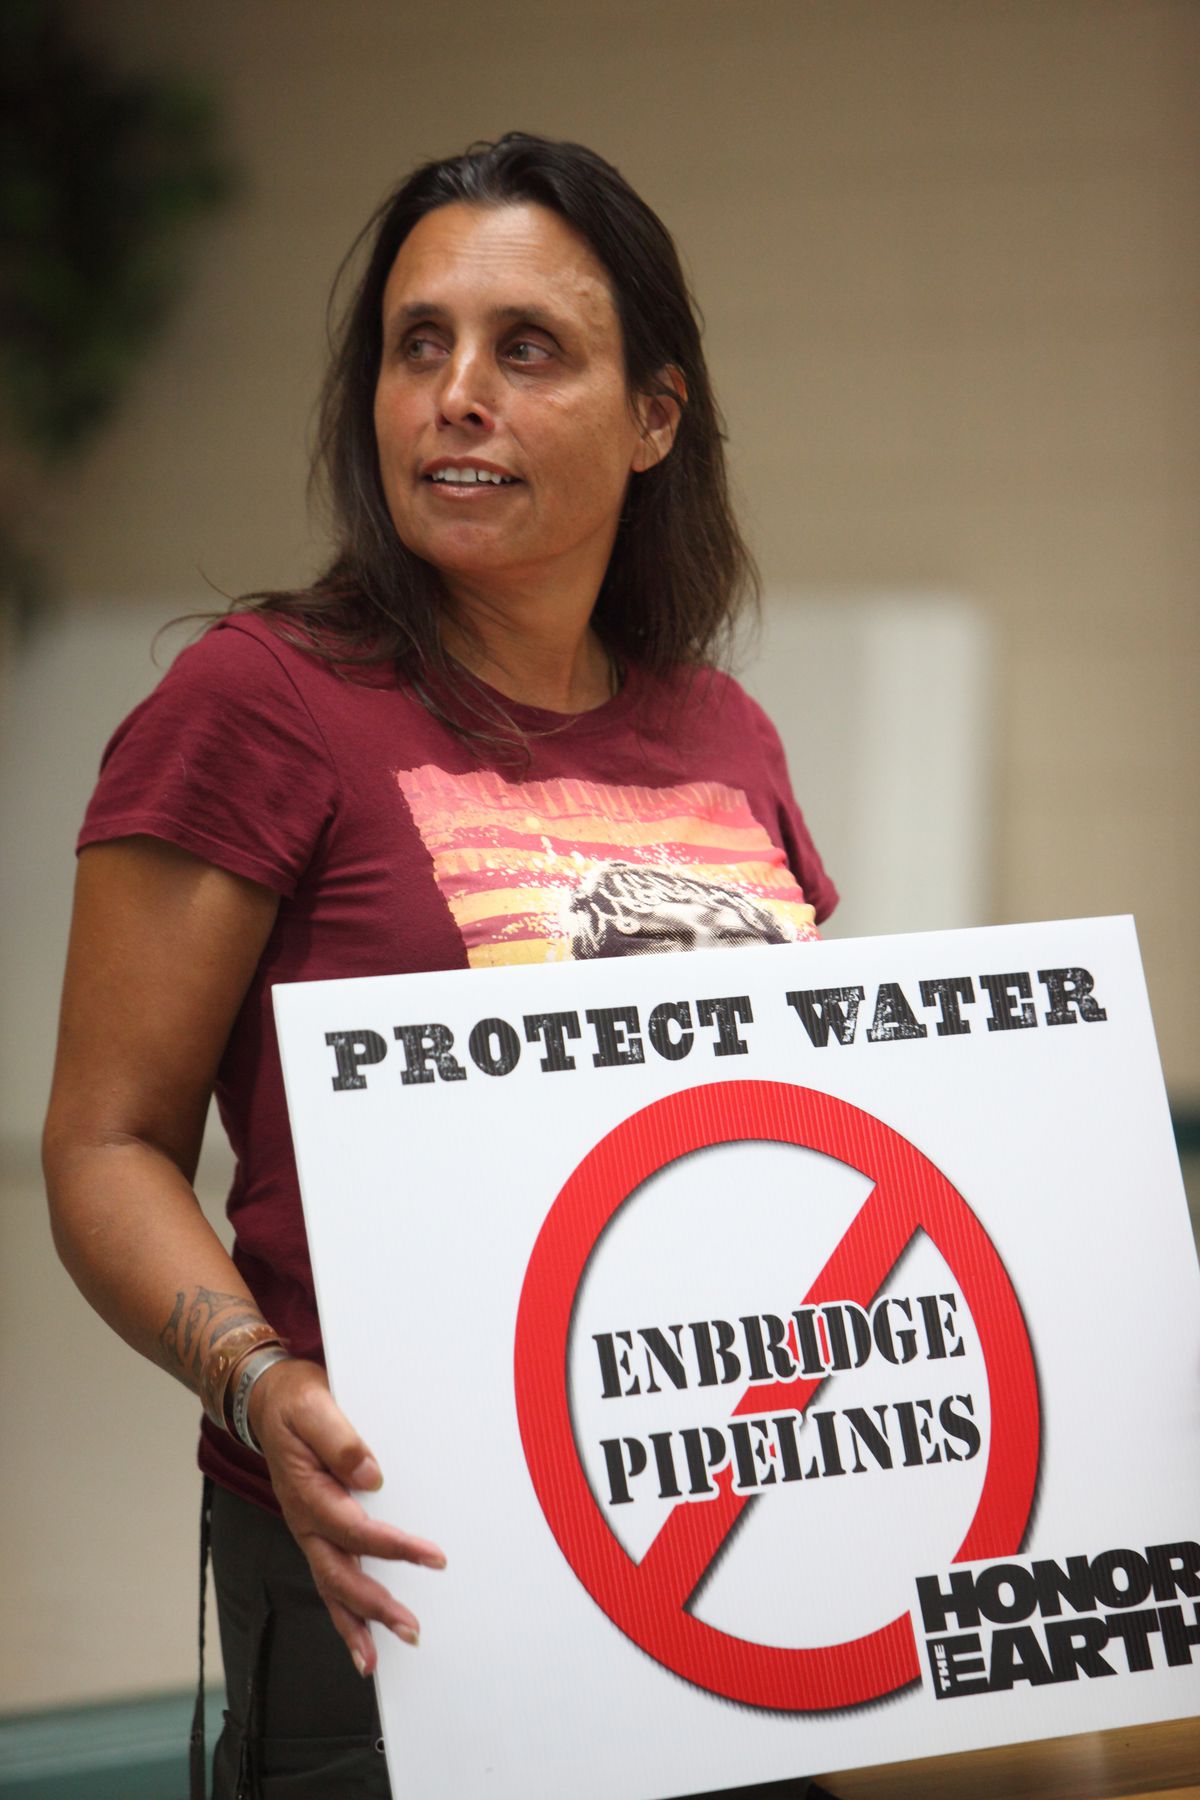 Winona LaDuke, Executive Director of Honor the Earth protests the Enbridge pipeline called the ‘SandPiper Line’ and Line 3.